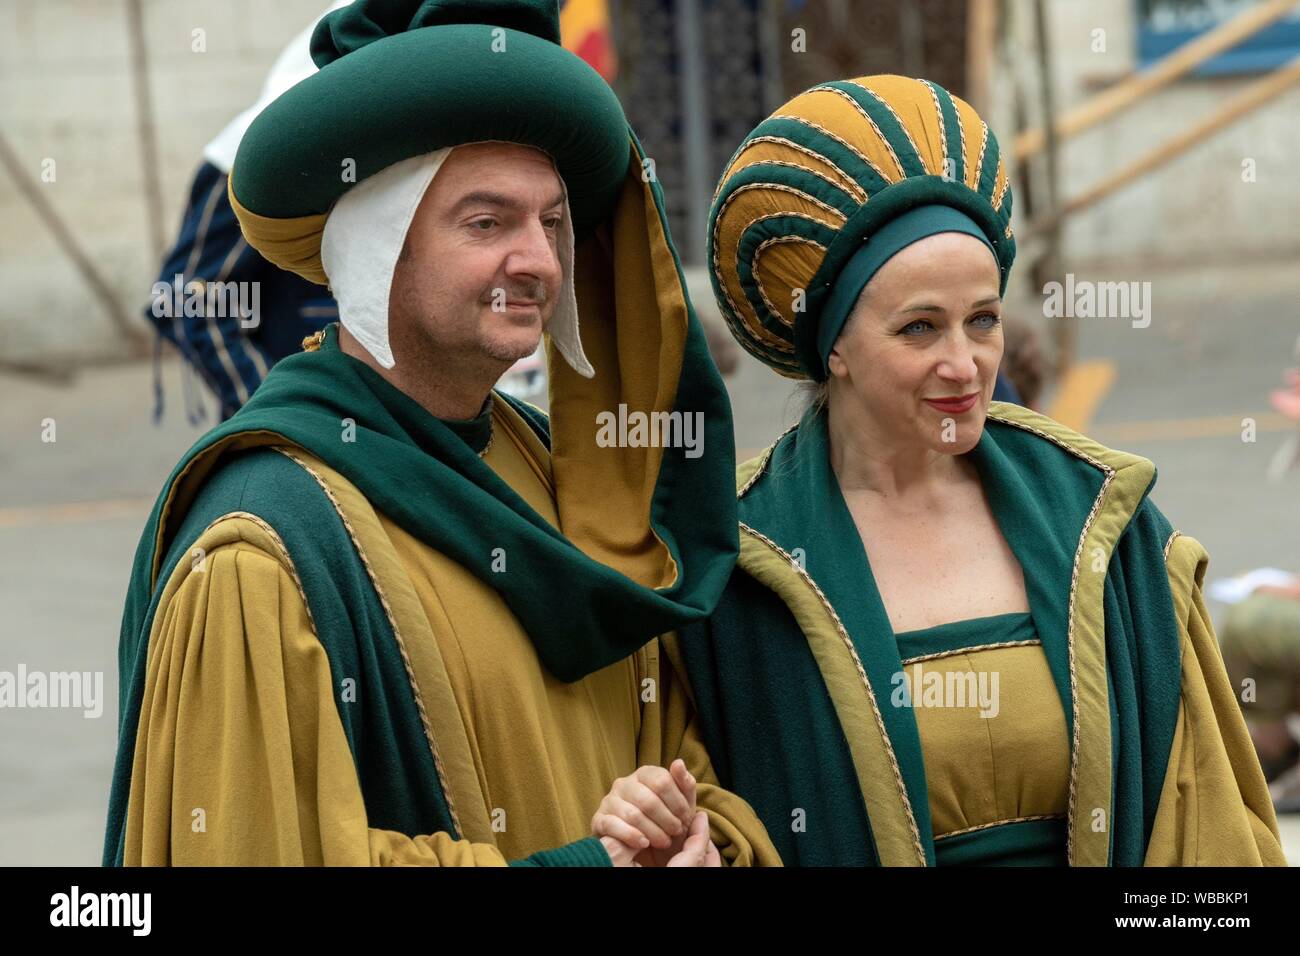 Couple of Performers in Calendimaggio Festival Pageant Assisi Umbria Italy World Location. Stock Photo